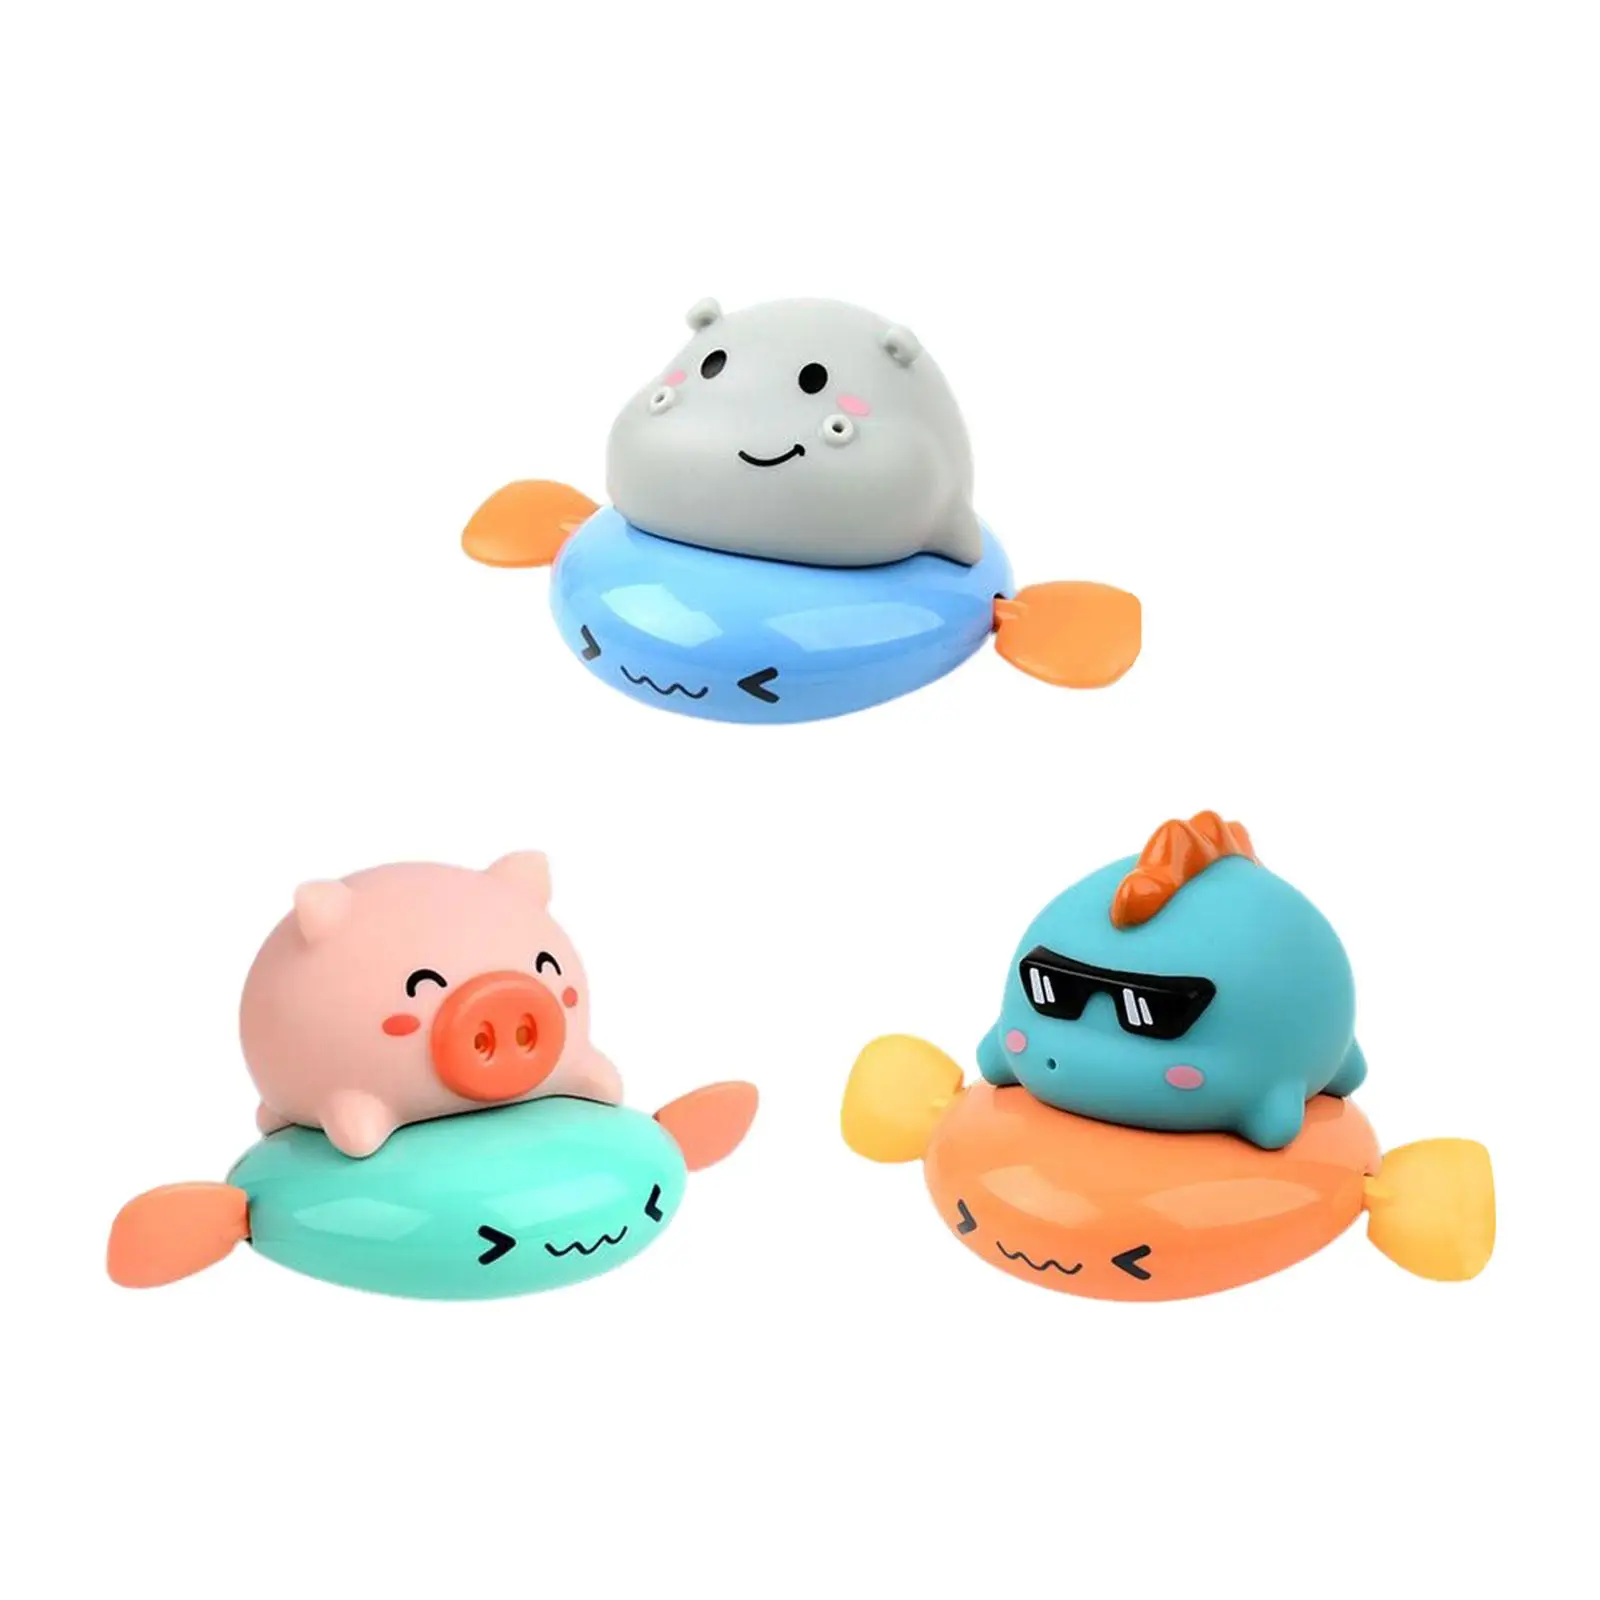 3Pcs Toy Swimming Pool Toy Water Spraying Toy Bath Time Water Toys for Boys and Girls